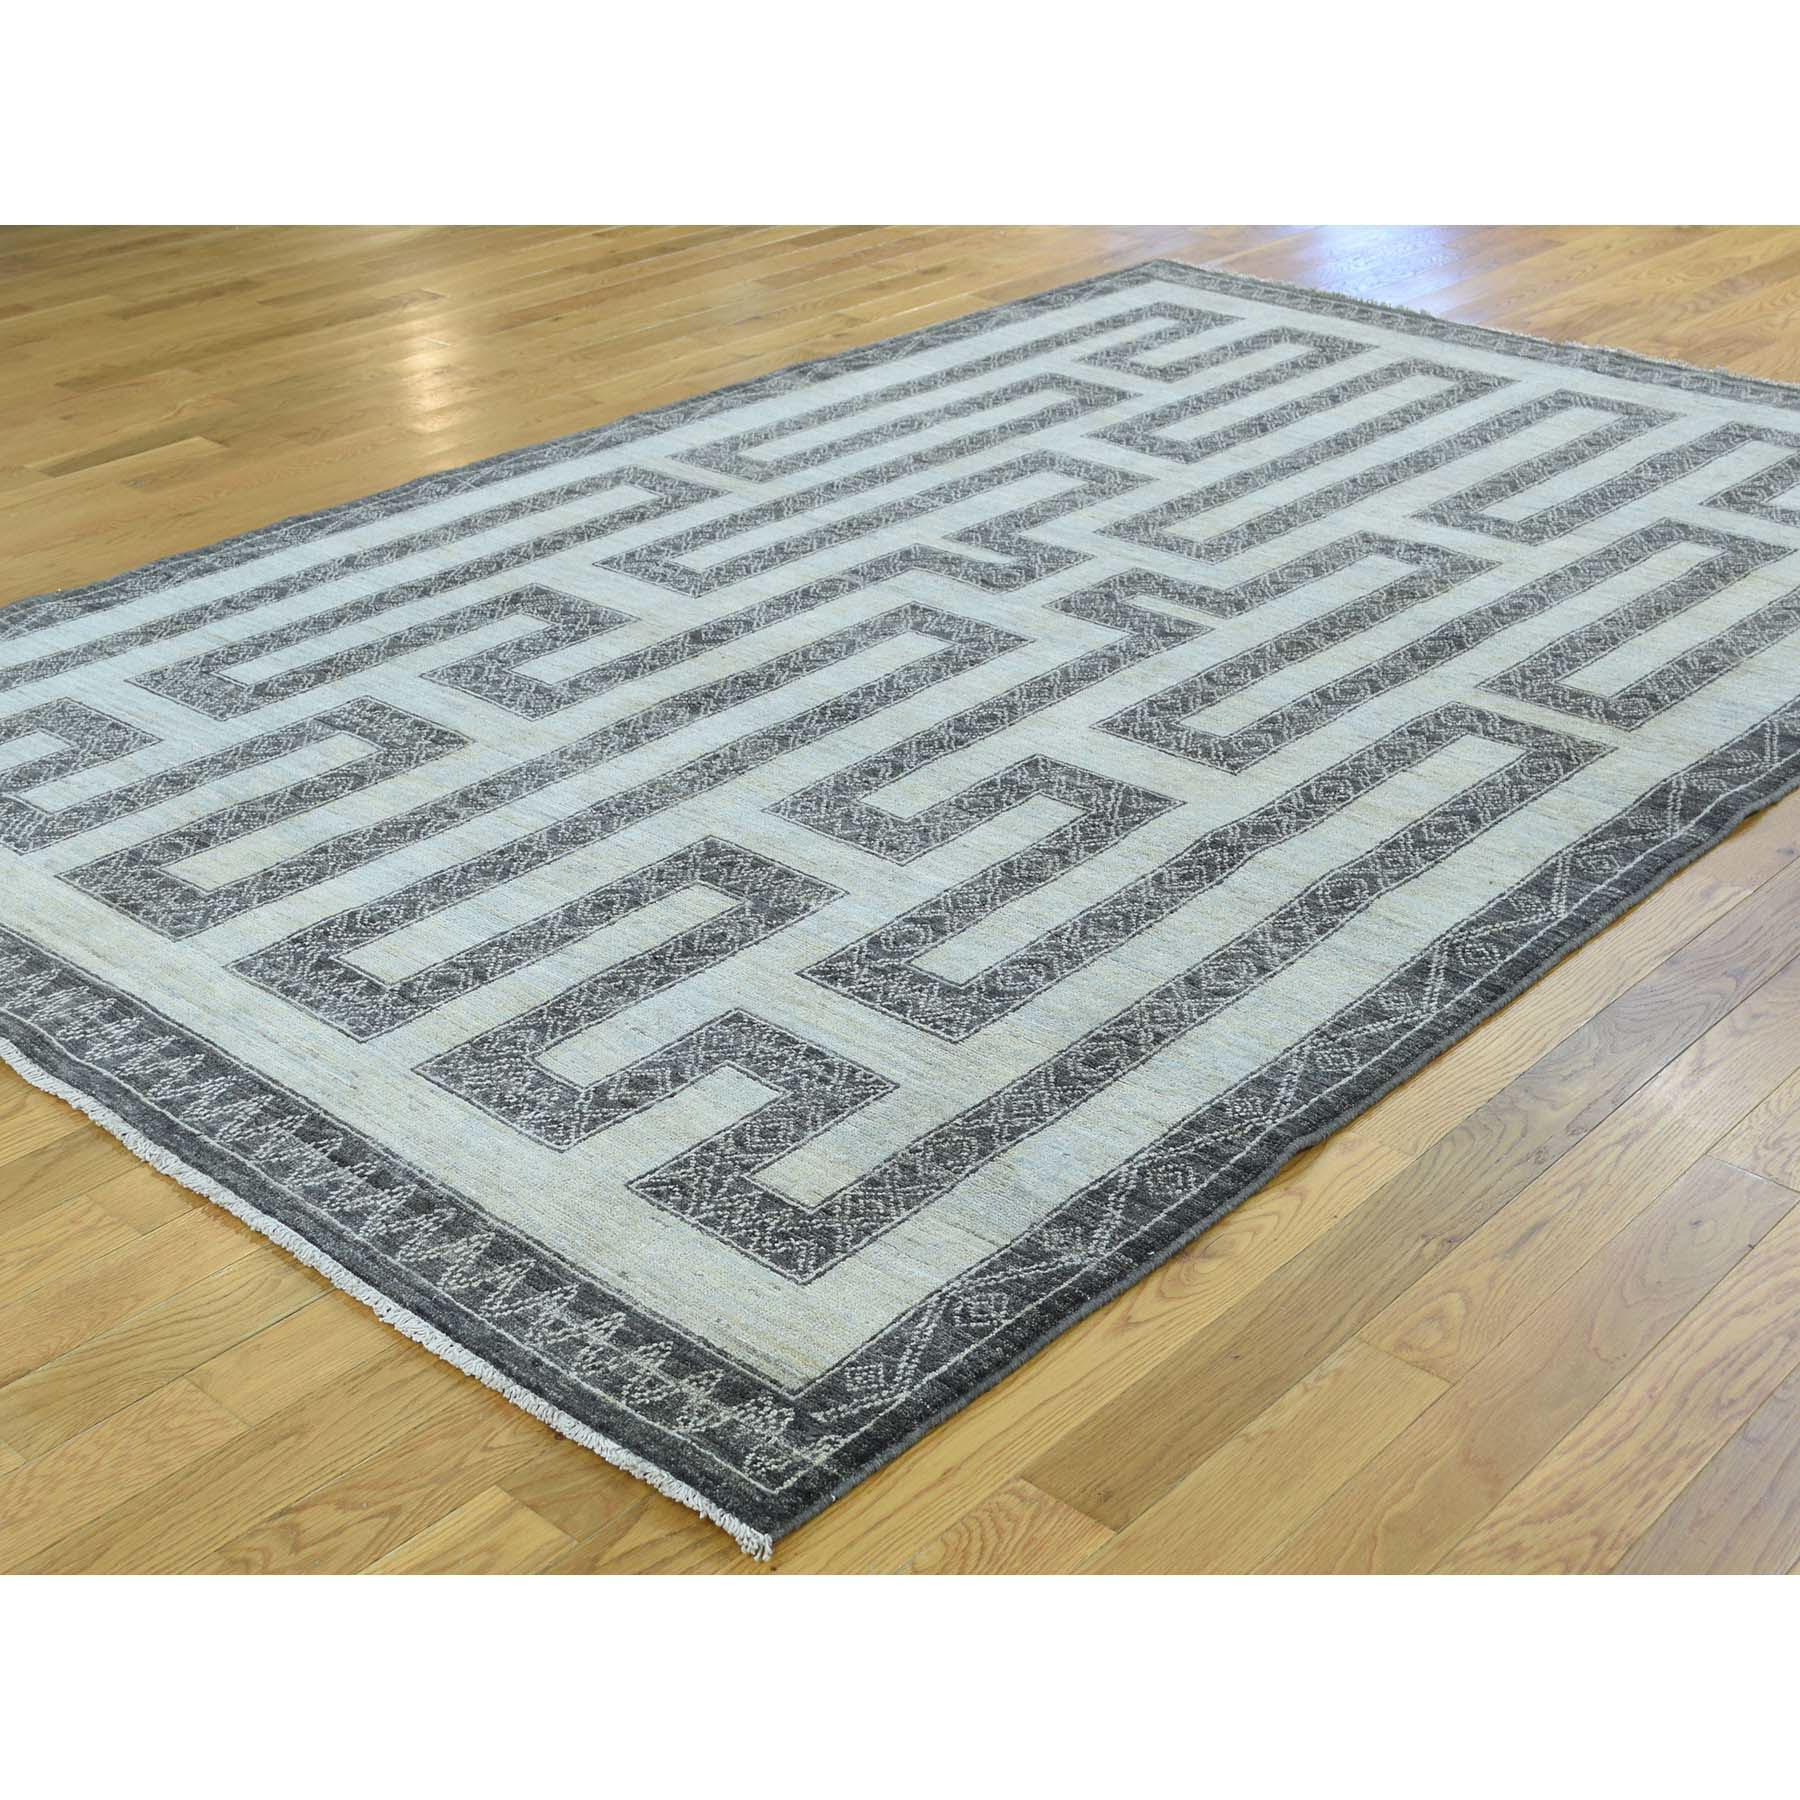 6-x9-1  Hand-Knotted Pure Wool Maze Design with Berber Influence Rug 